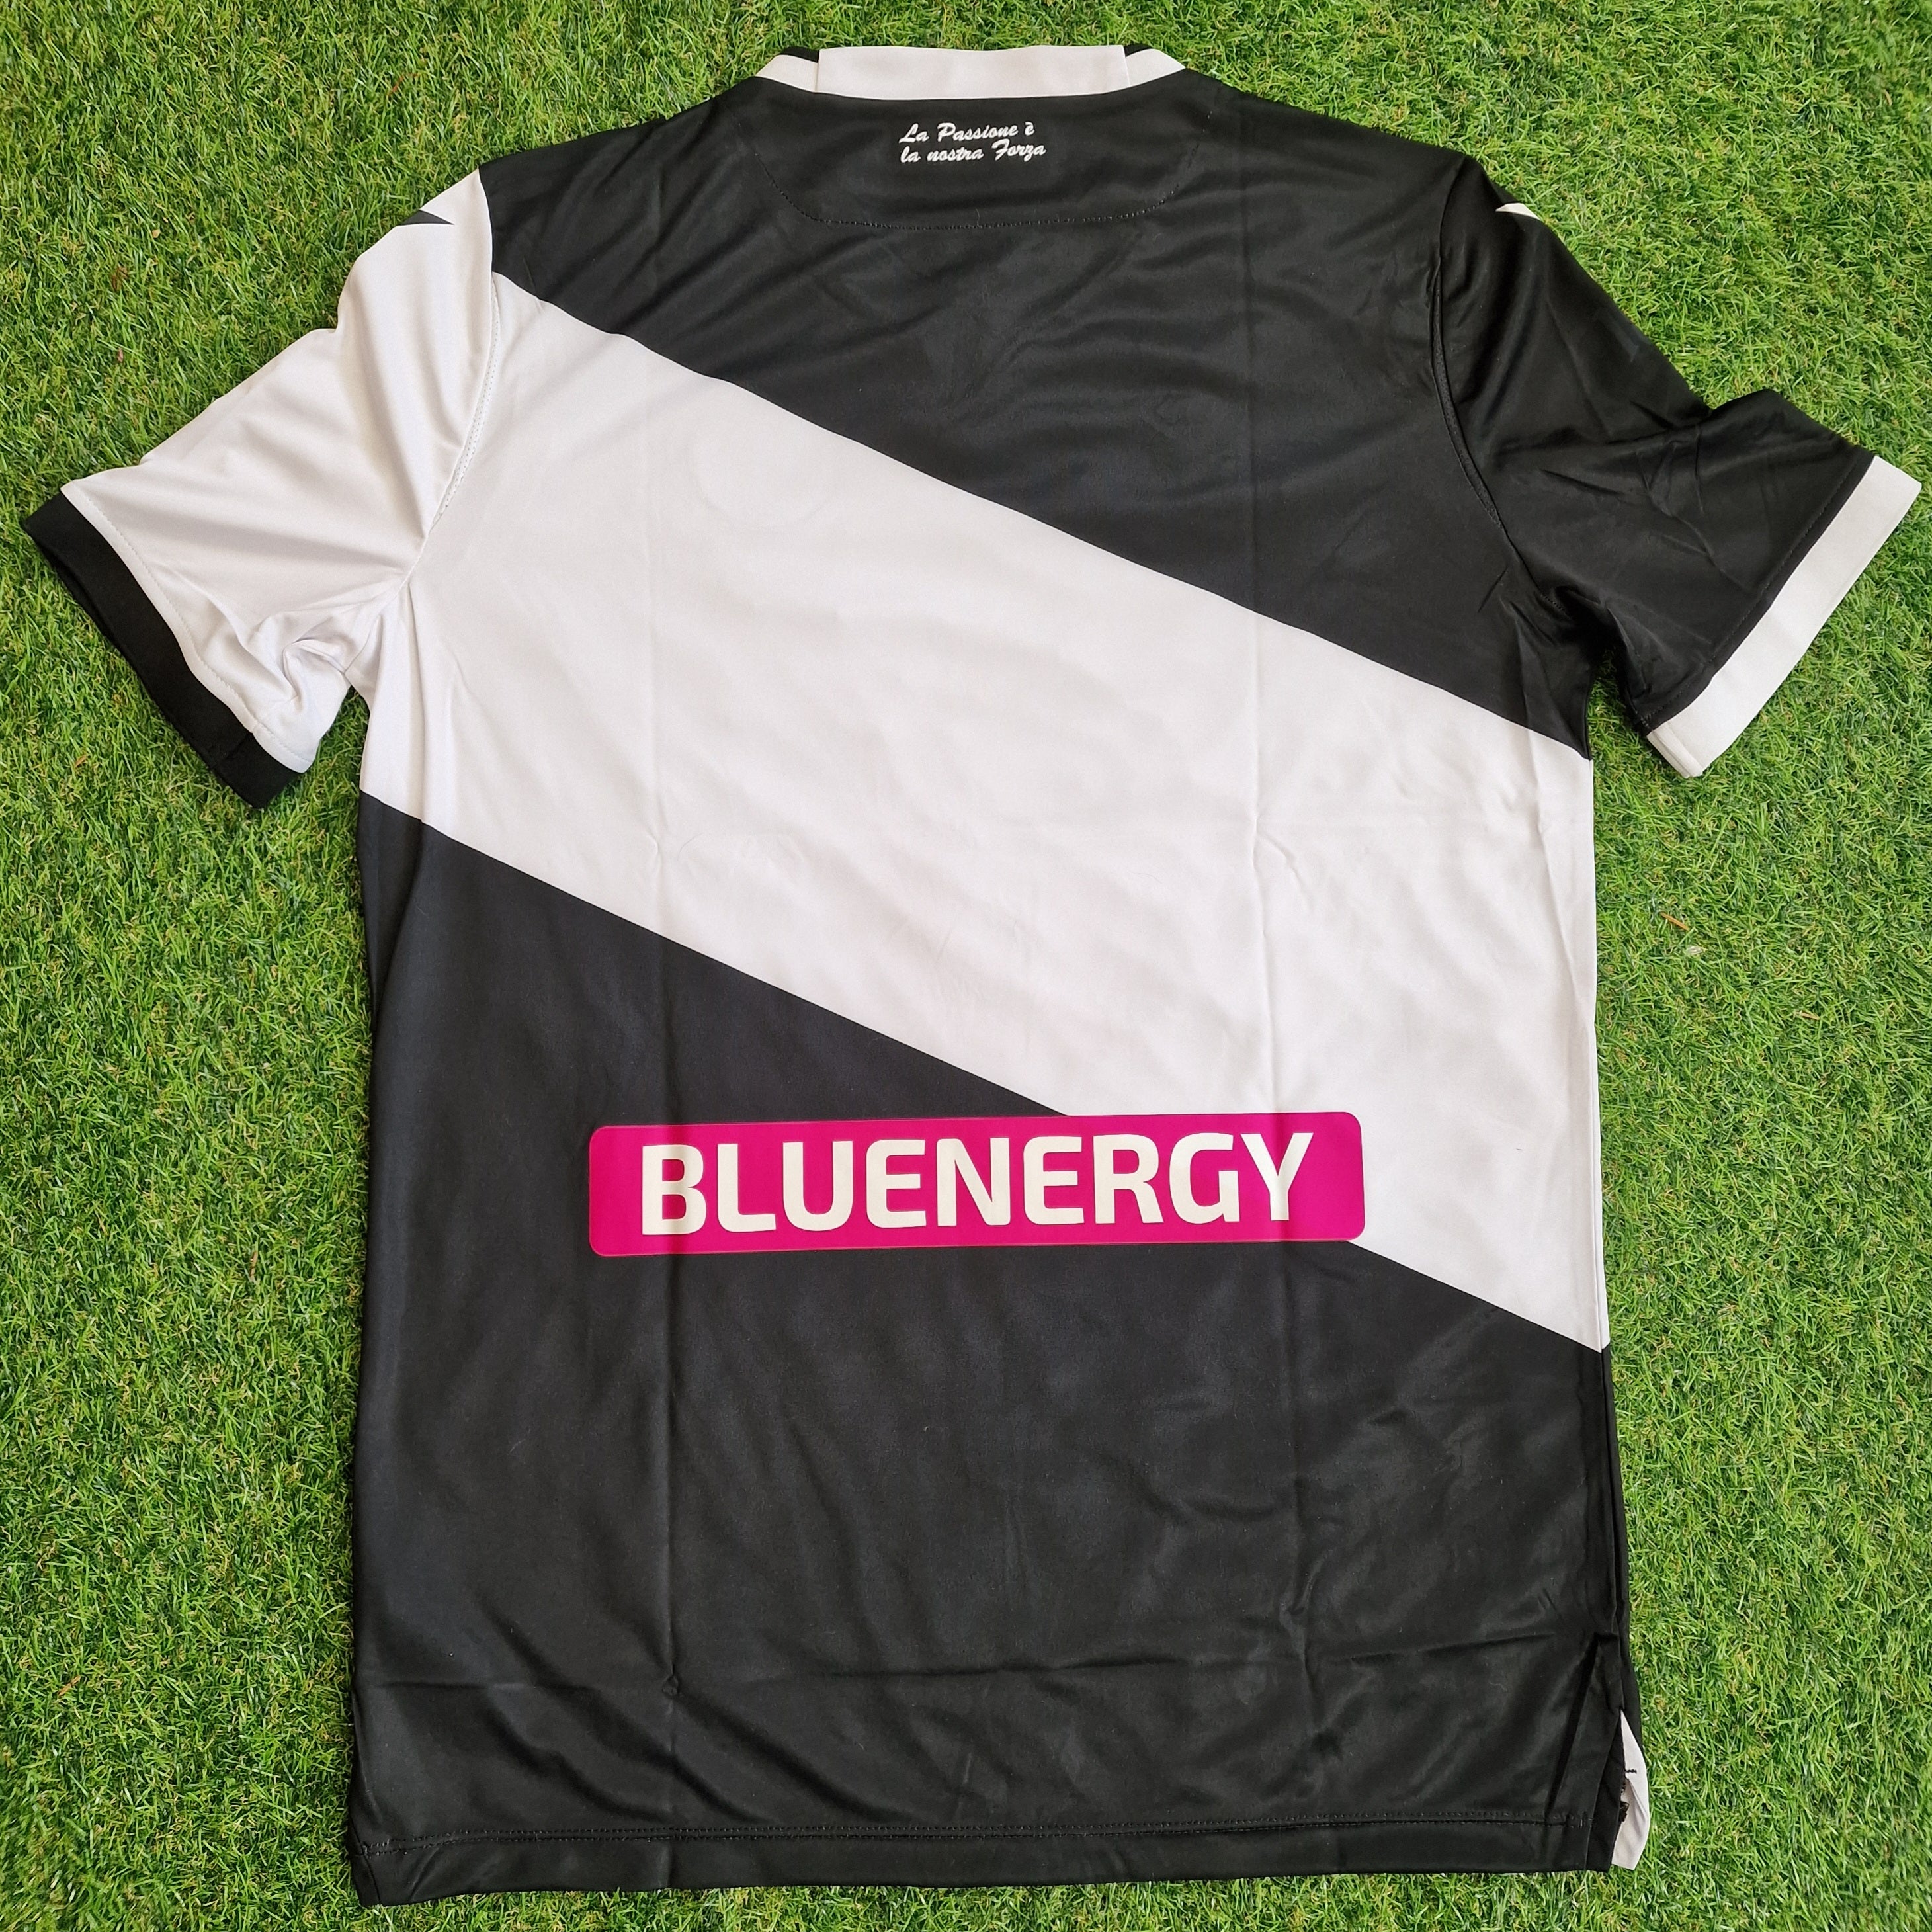 Udinese Home Shirt 2020/21 - Size 2XL